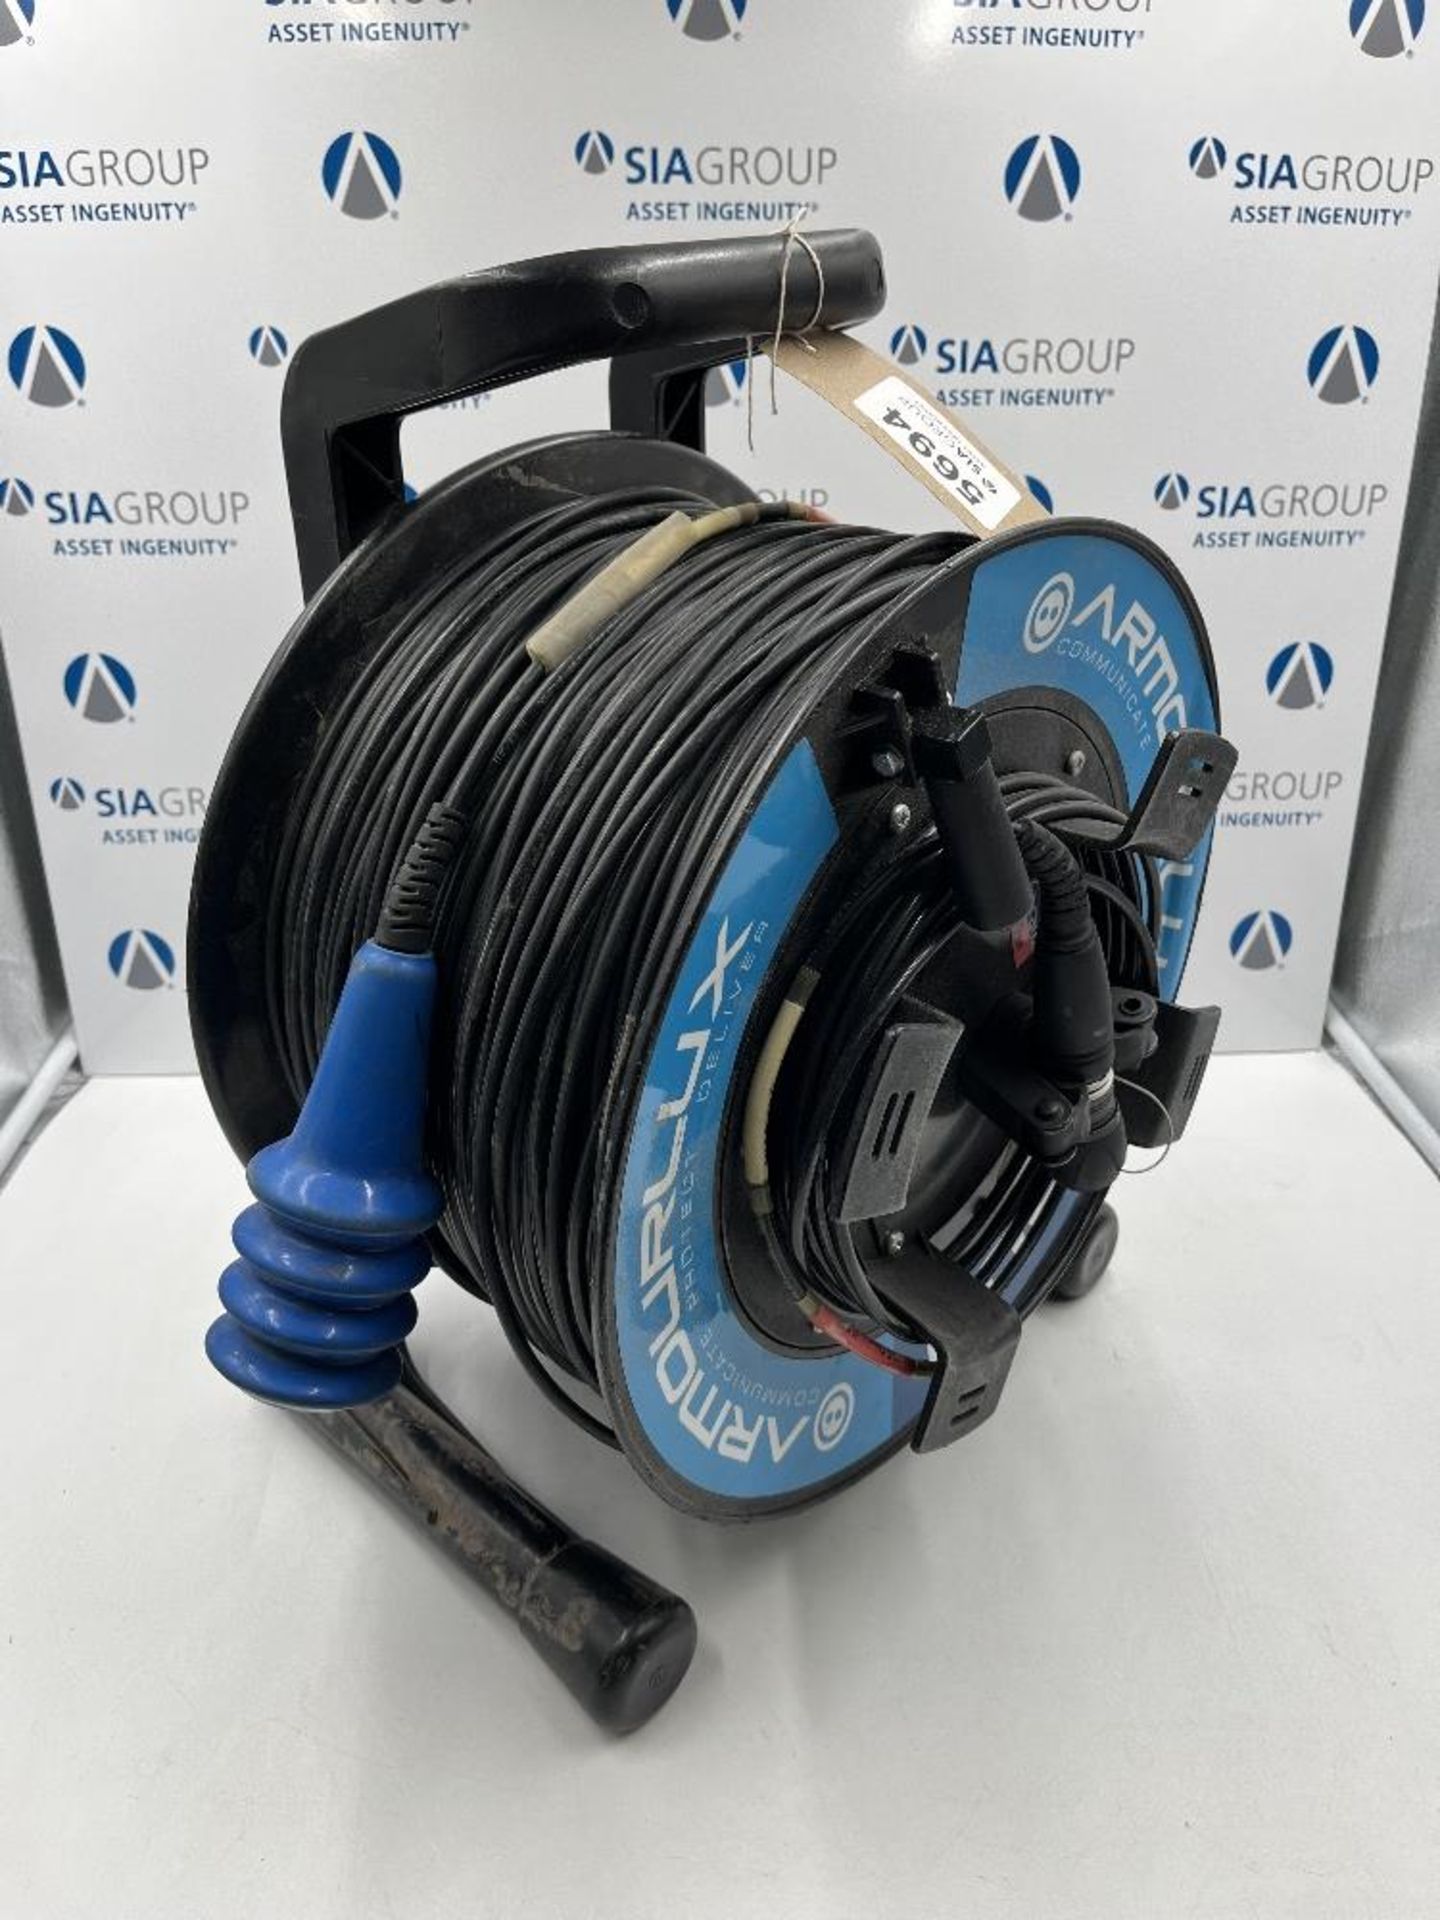 250m Fibre Cable on Armourlux 500 Drum - Image 2 of 4